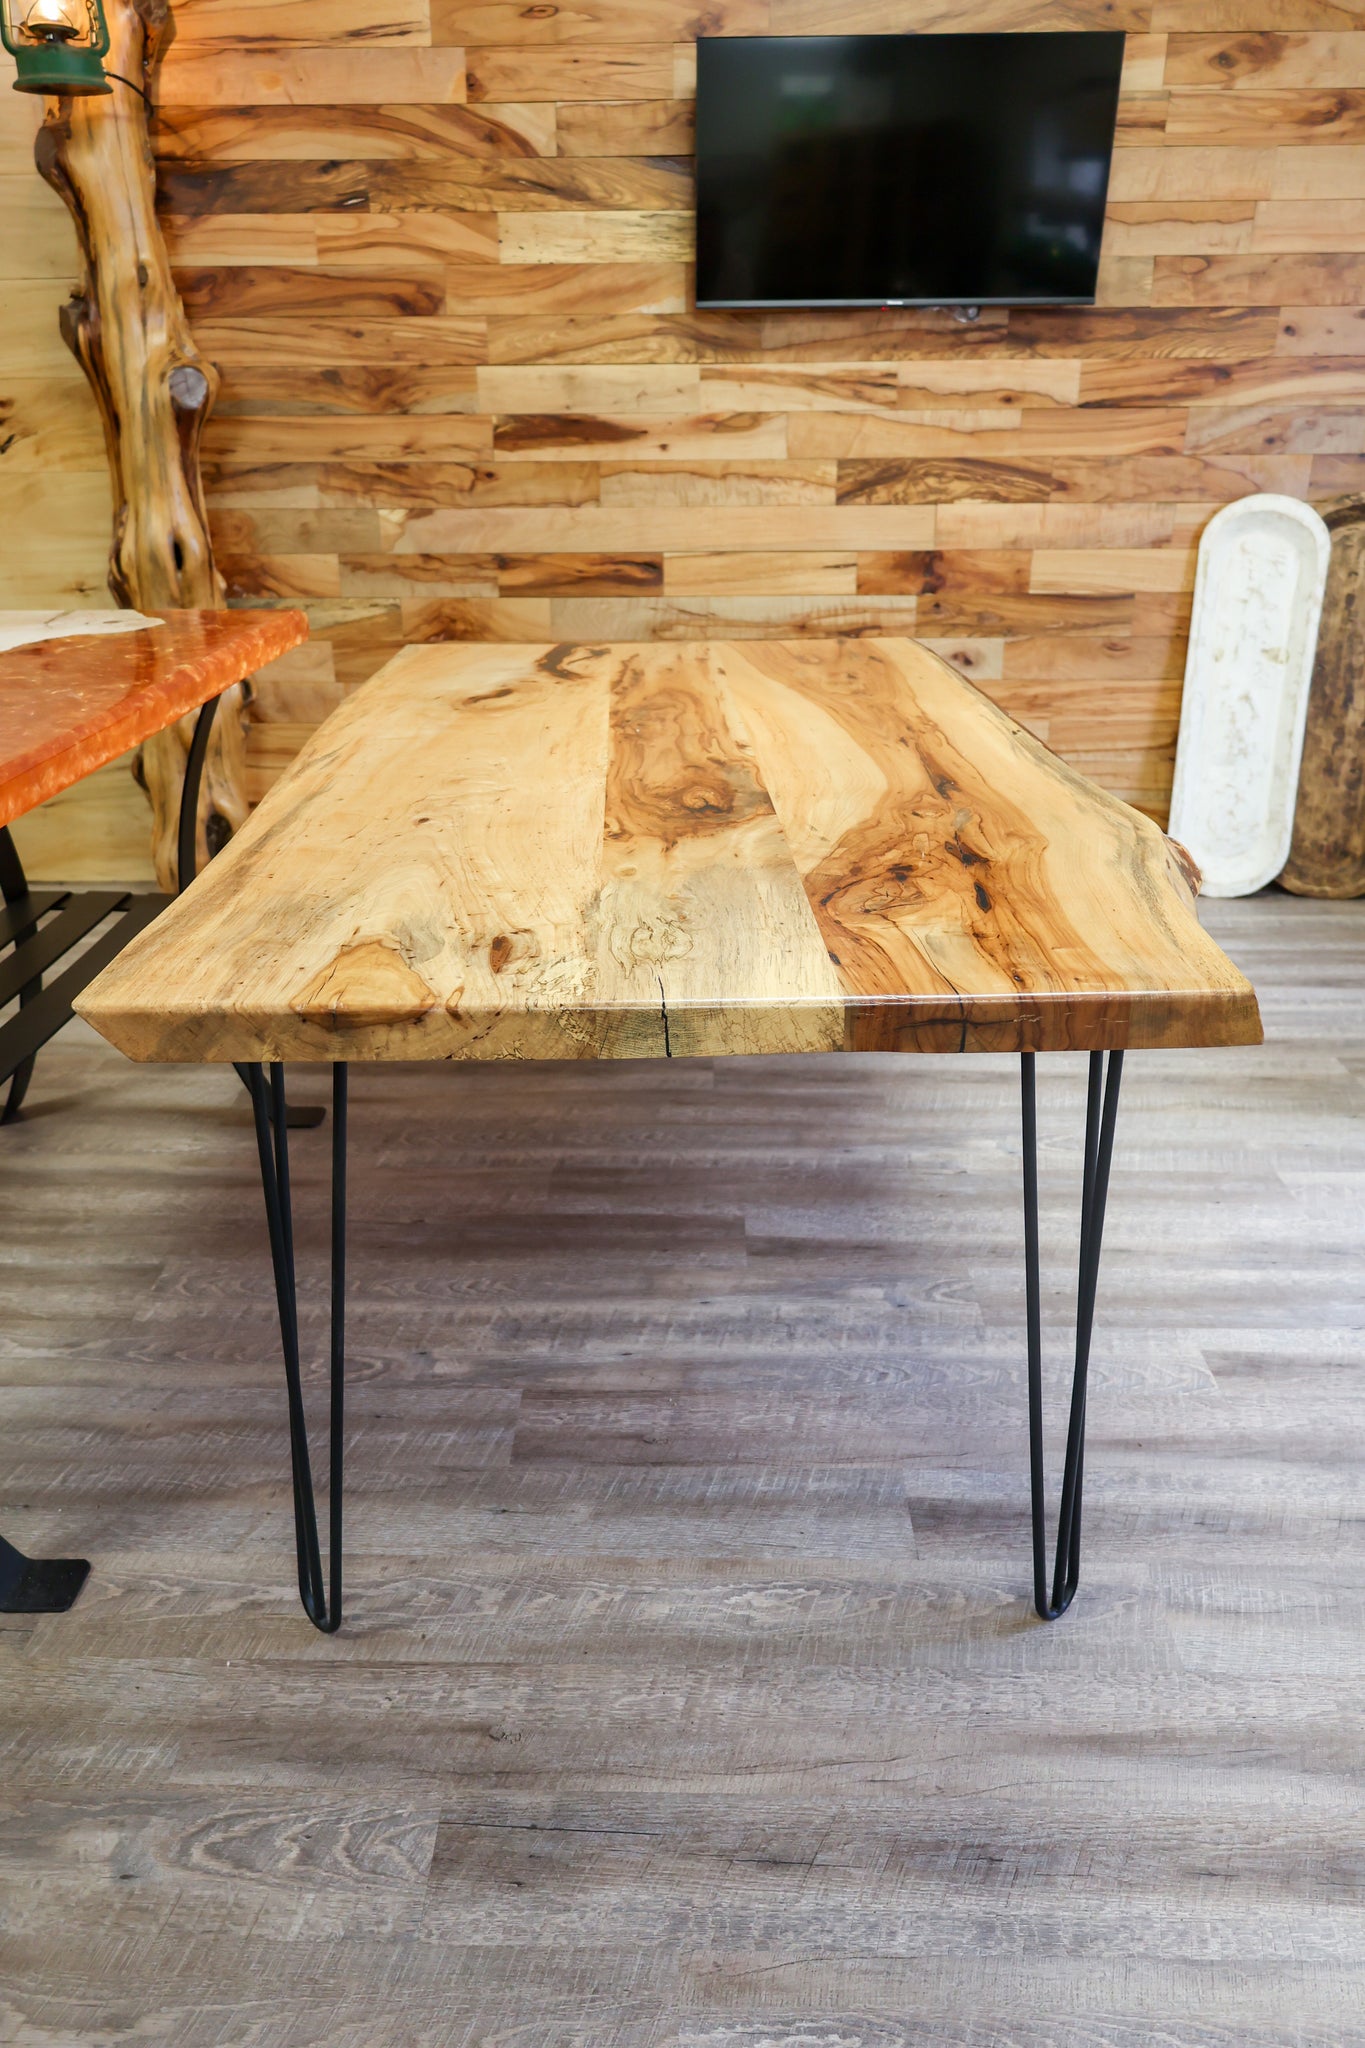 Castleman Pecan Dining Room Table 6' with Live edge on 2 side w/hair pin legs - #110